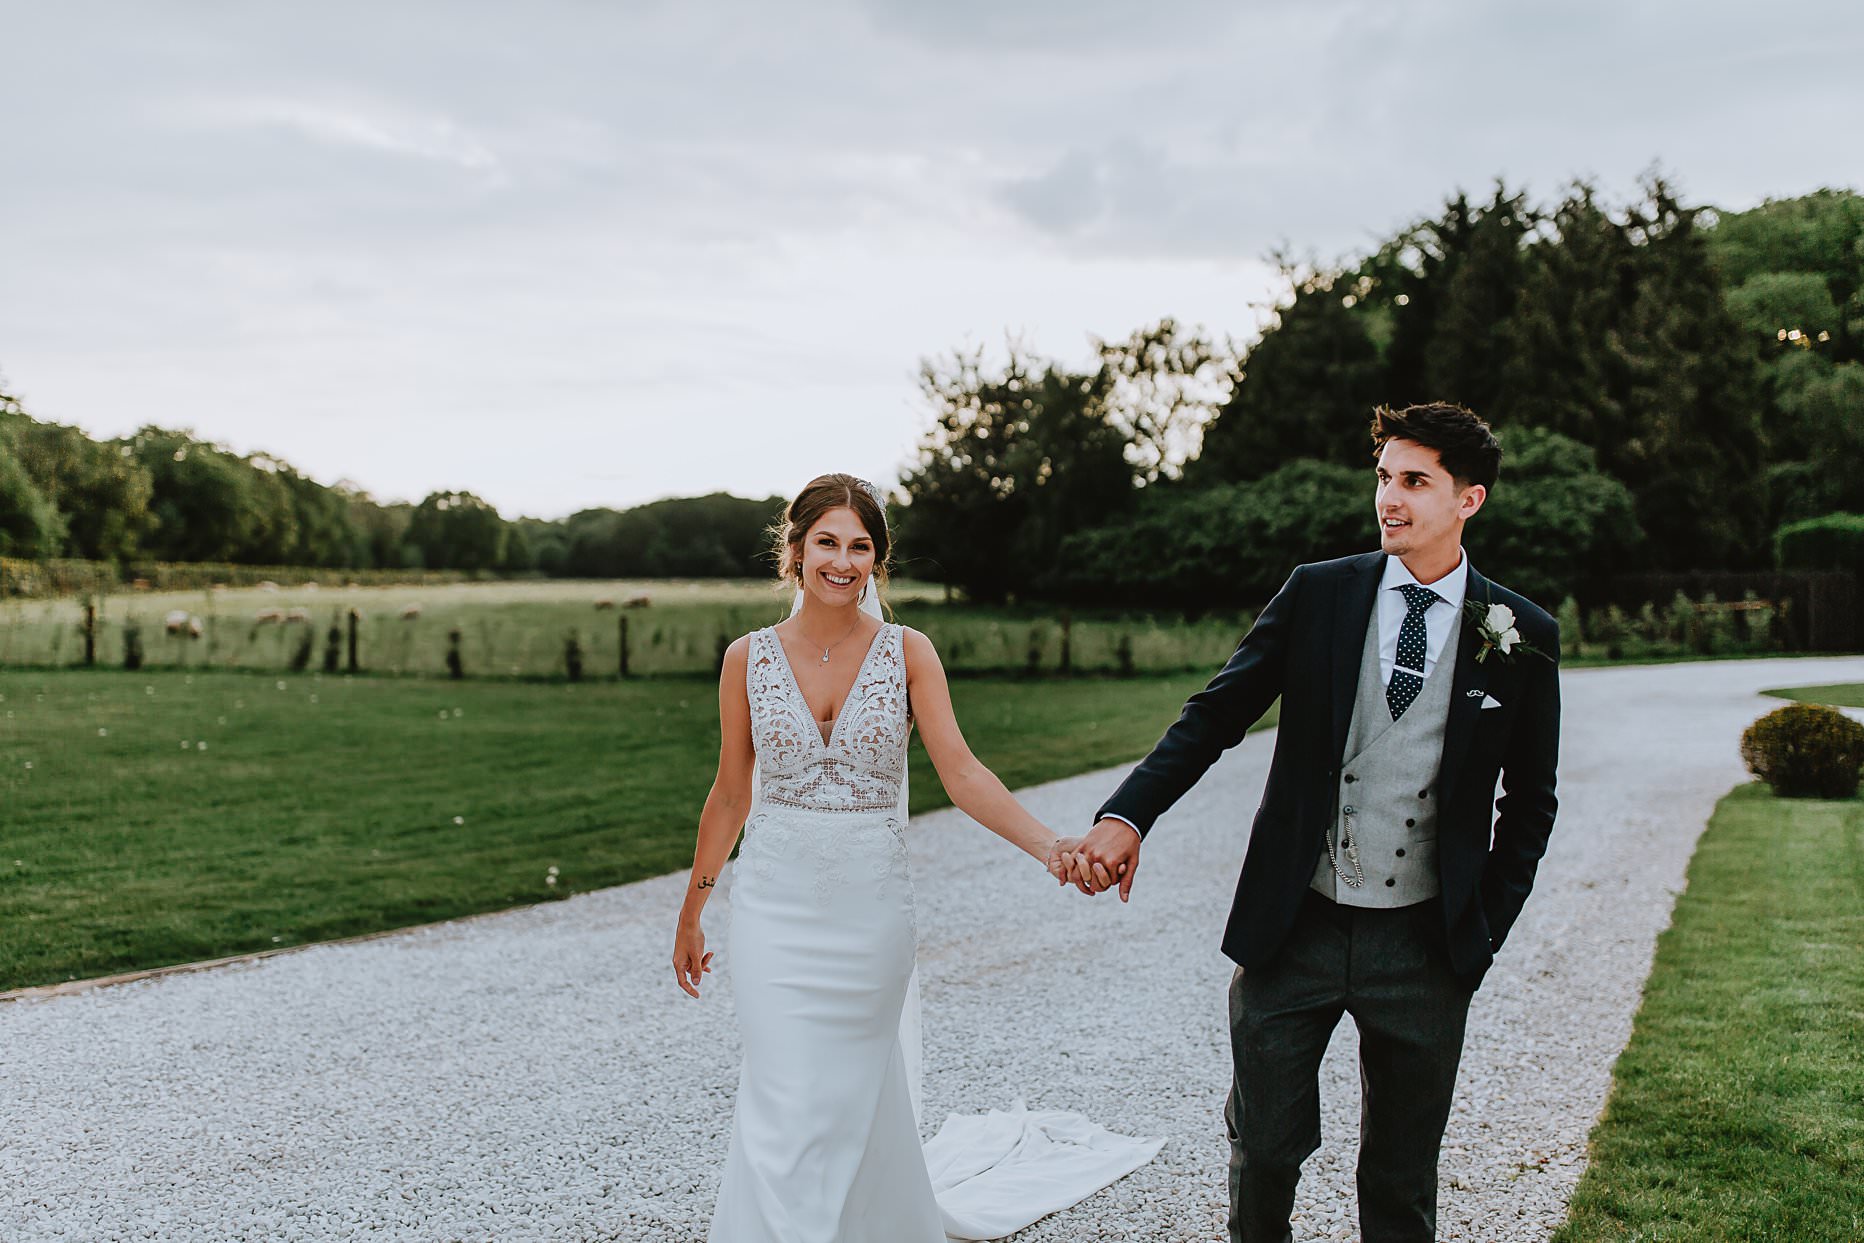 Bride and groom walking hand in hand at the front of Hazel Gap Barn. The bride is wearing a floor length wedding dress and is happy and smiling towards the camera. The groom is wearing a navy suit and looking into the distance.